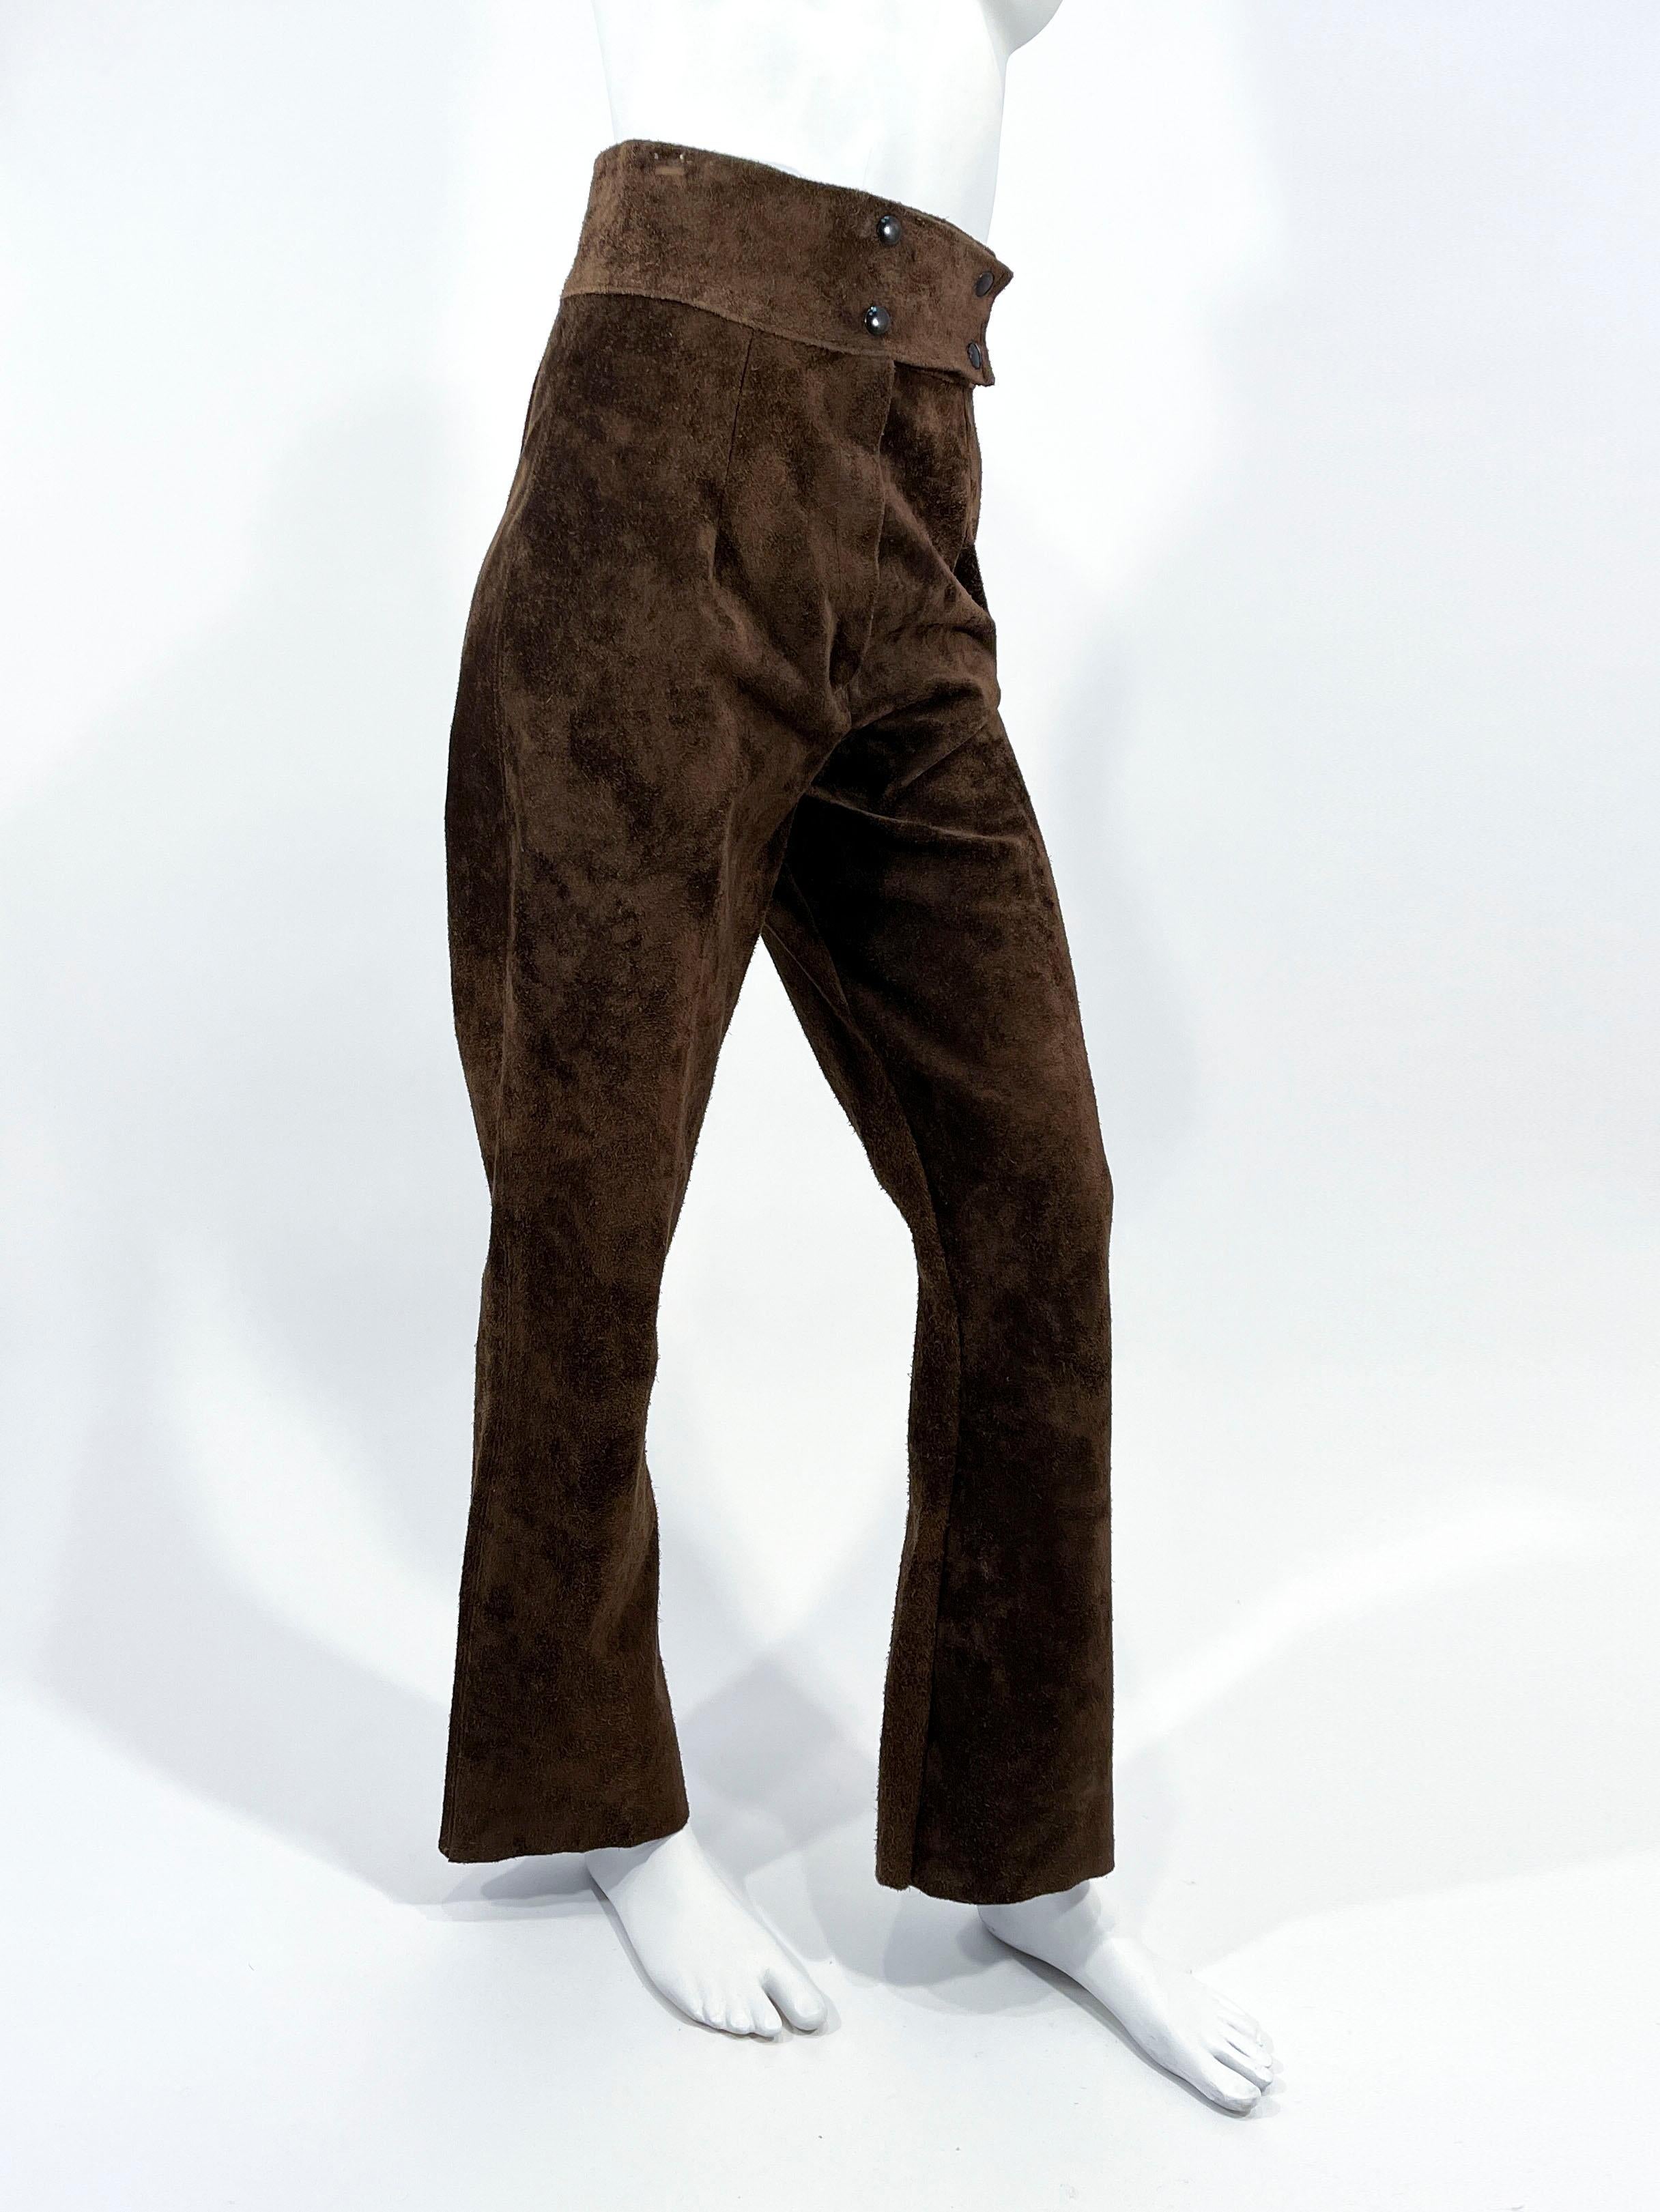 Black 1960s/1970s Chocolate Brown Suede Pants For Sale